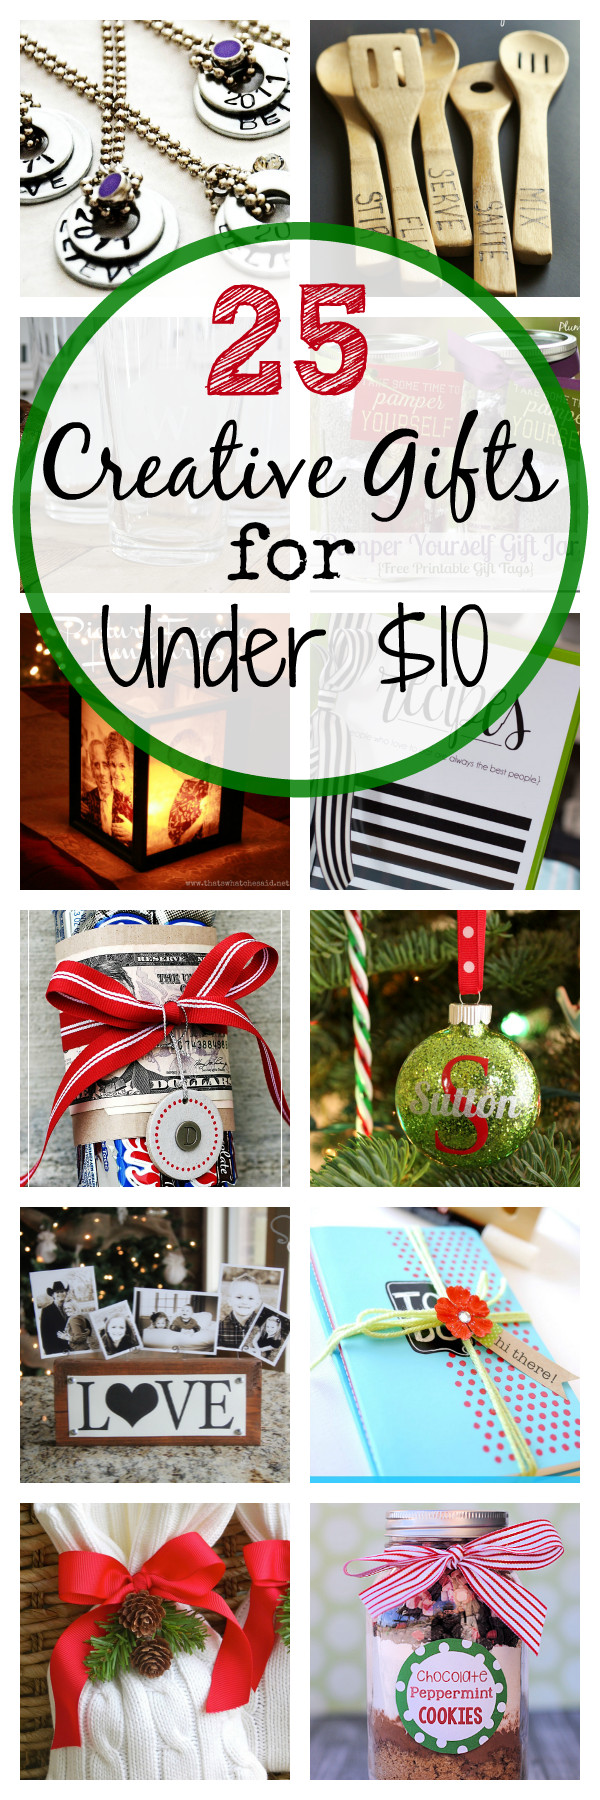 Employee Holiday Gift Ideas Under 20
 25 Creative & Cheap Christmas Gifts that Cost Under $10